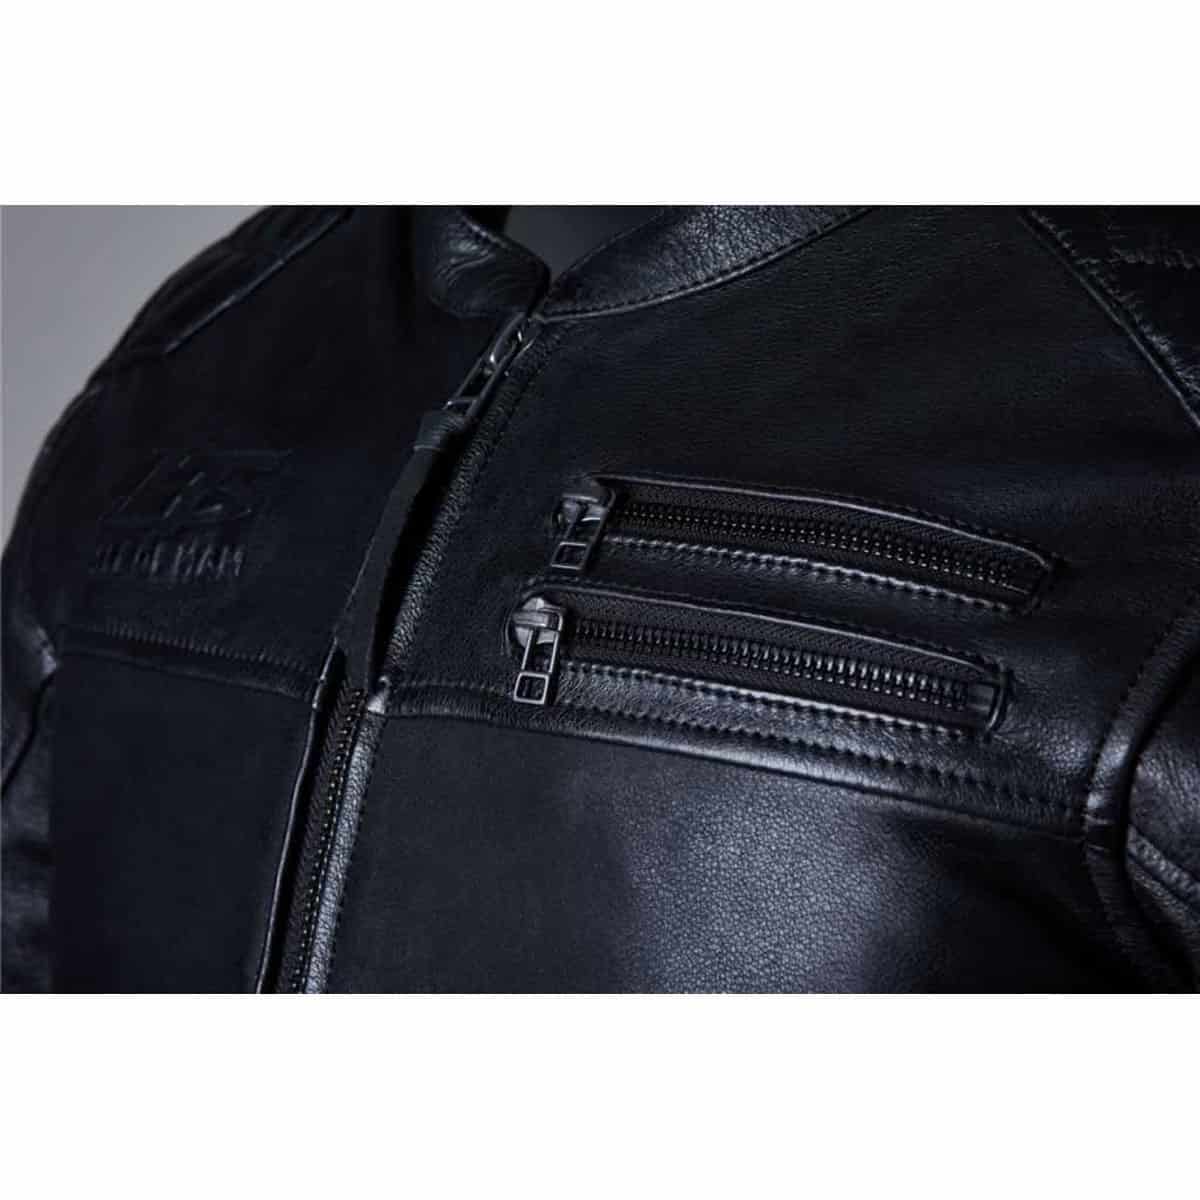 RST Hillberry 2 leather jacket zip detail